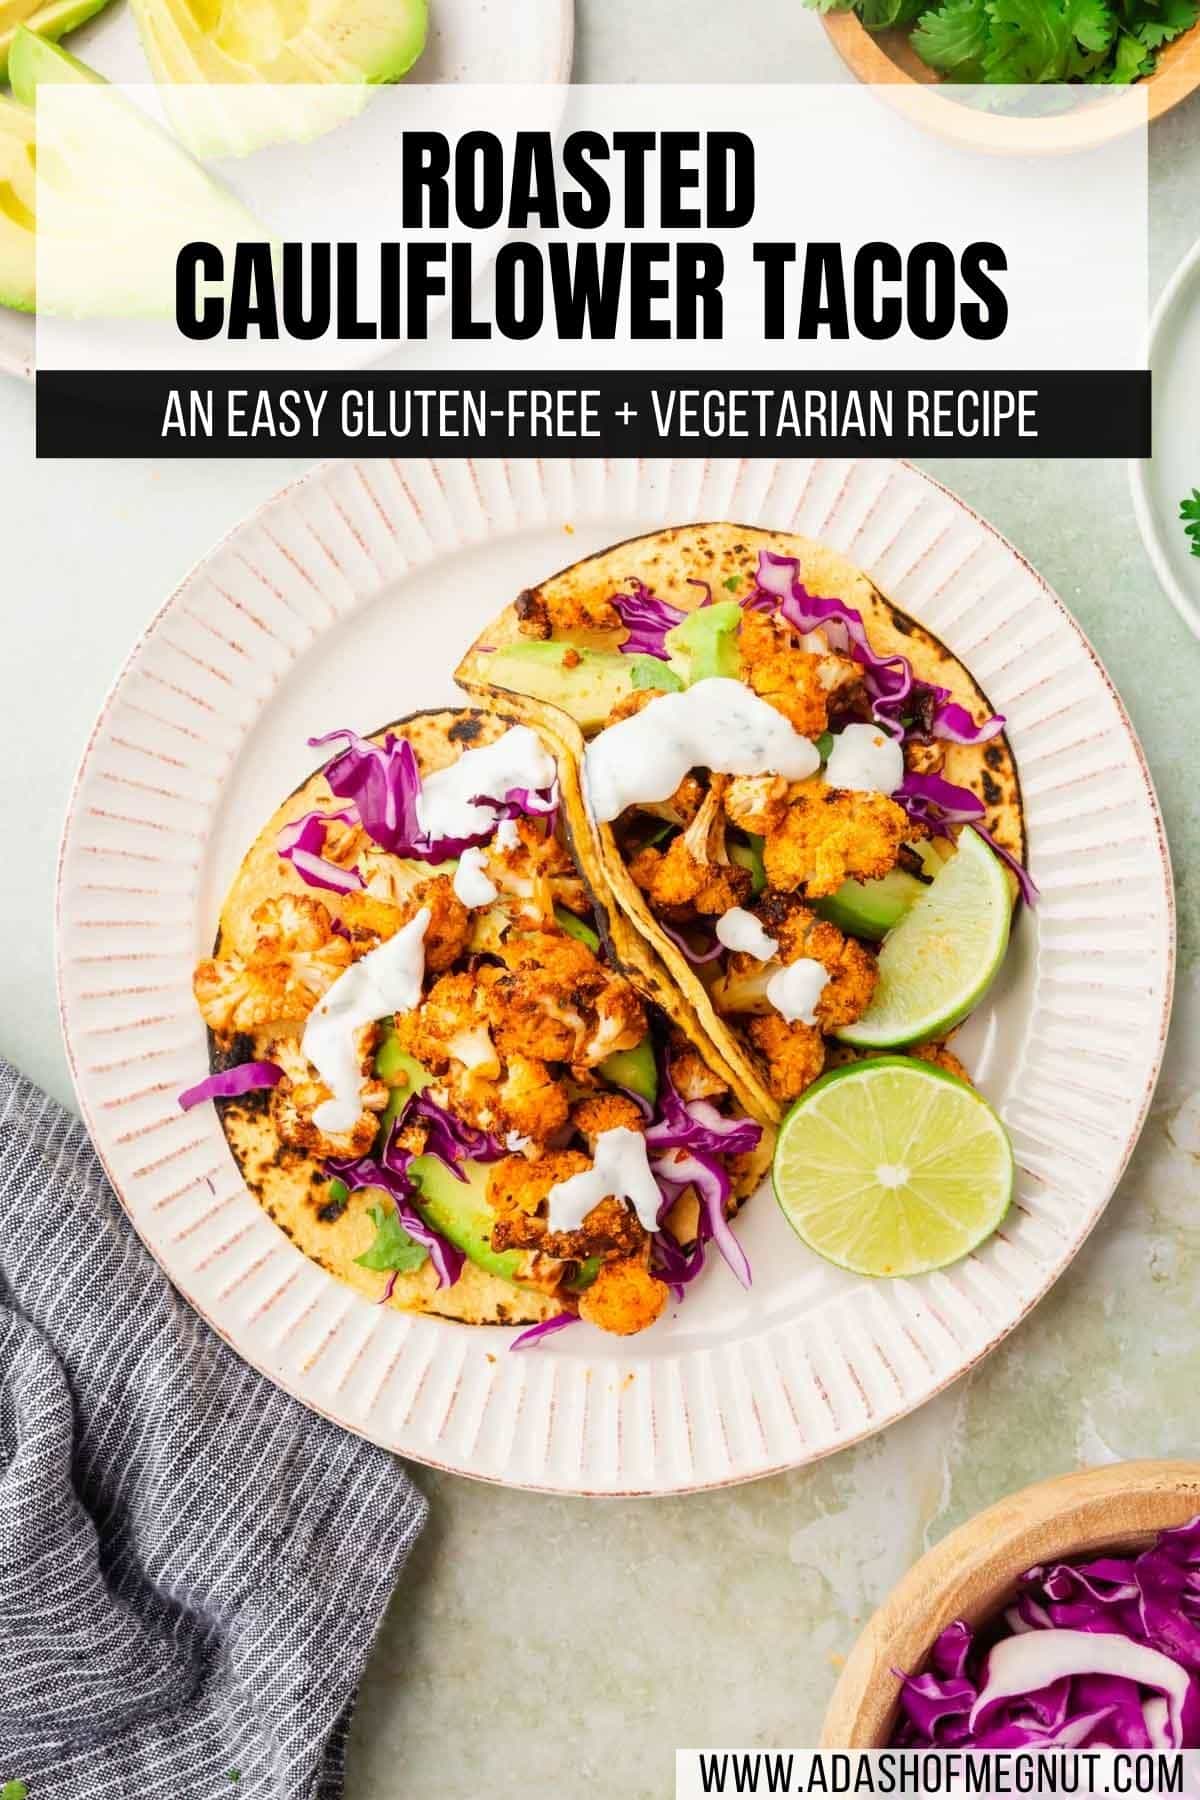 A closeup of a cauliflower taco in a corn tortilla with cilantro, purple cabbage and sour cream with a text overlay.